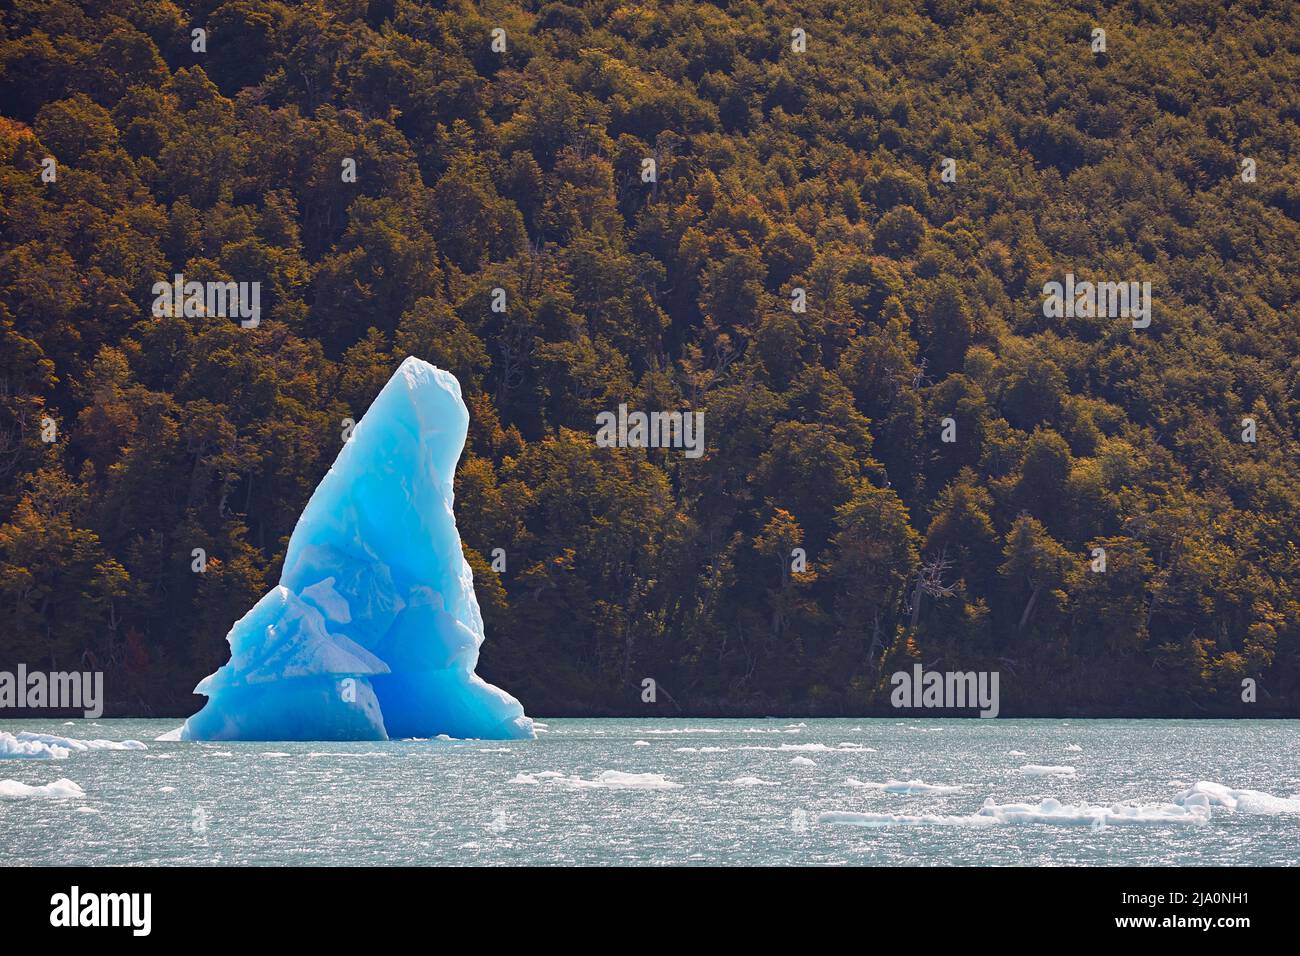 A big blue iceberg in the 'Canal de los Tempanos' bay with autumn trees in the background, Los Glaciares National Park, El Calafate, Argentina. Stock Photo